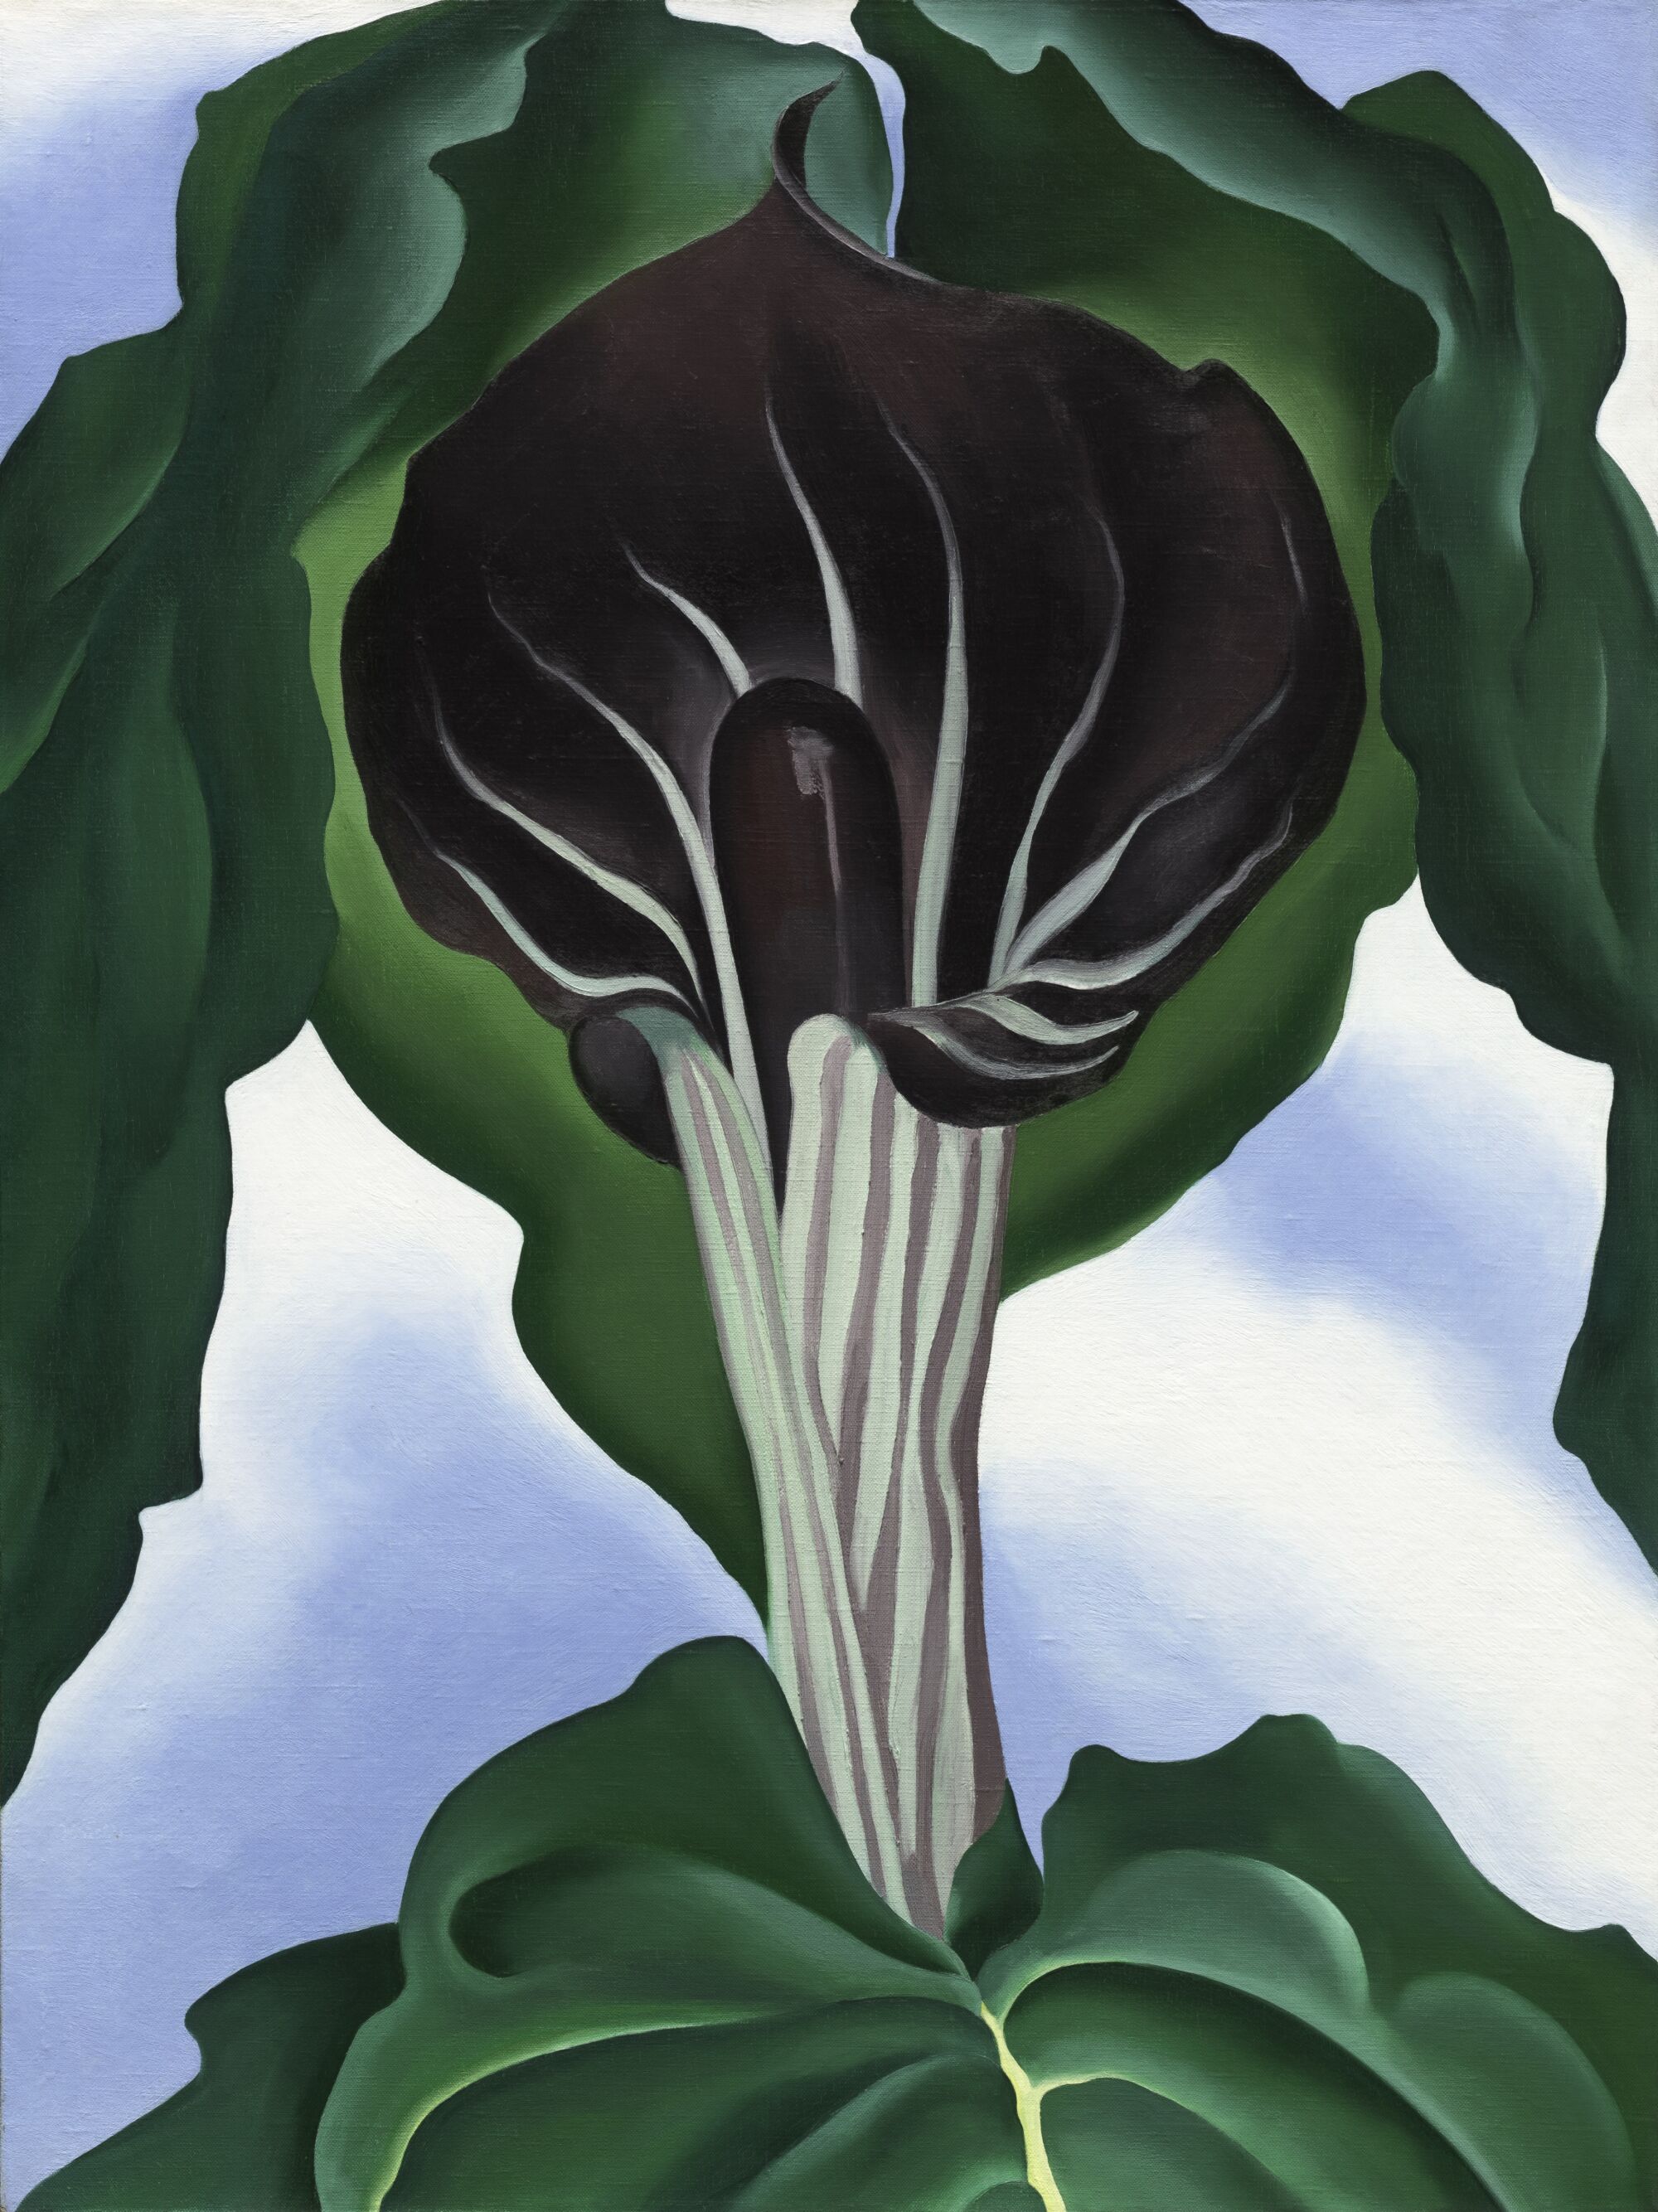 "Jack-in-the-Pulpit No. 3" by Georgia O'Keeffe 